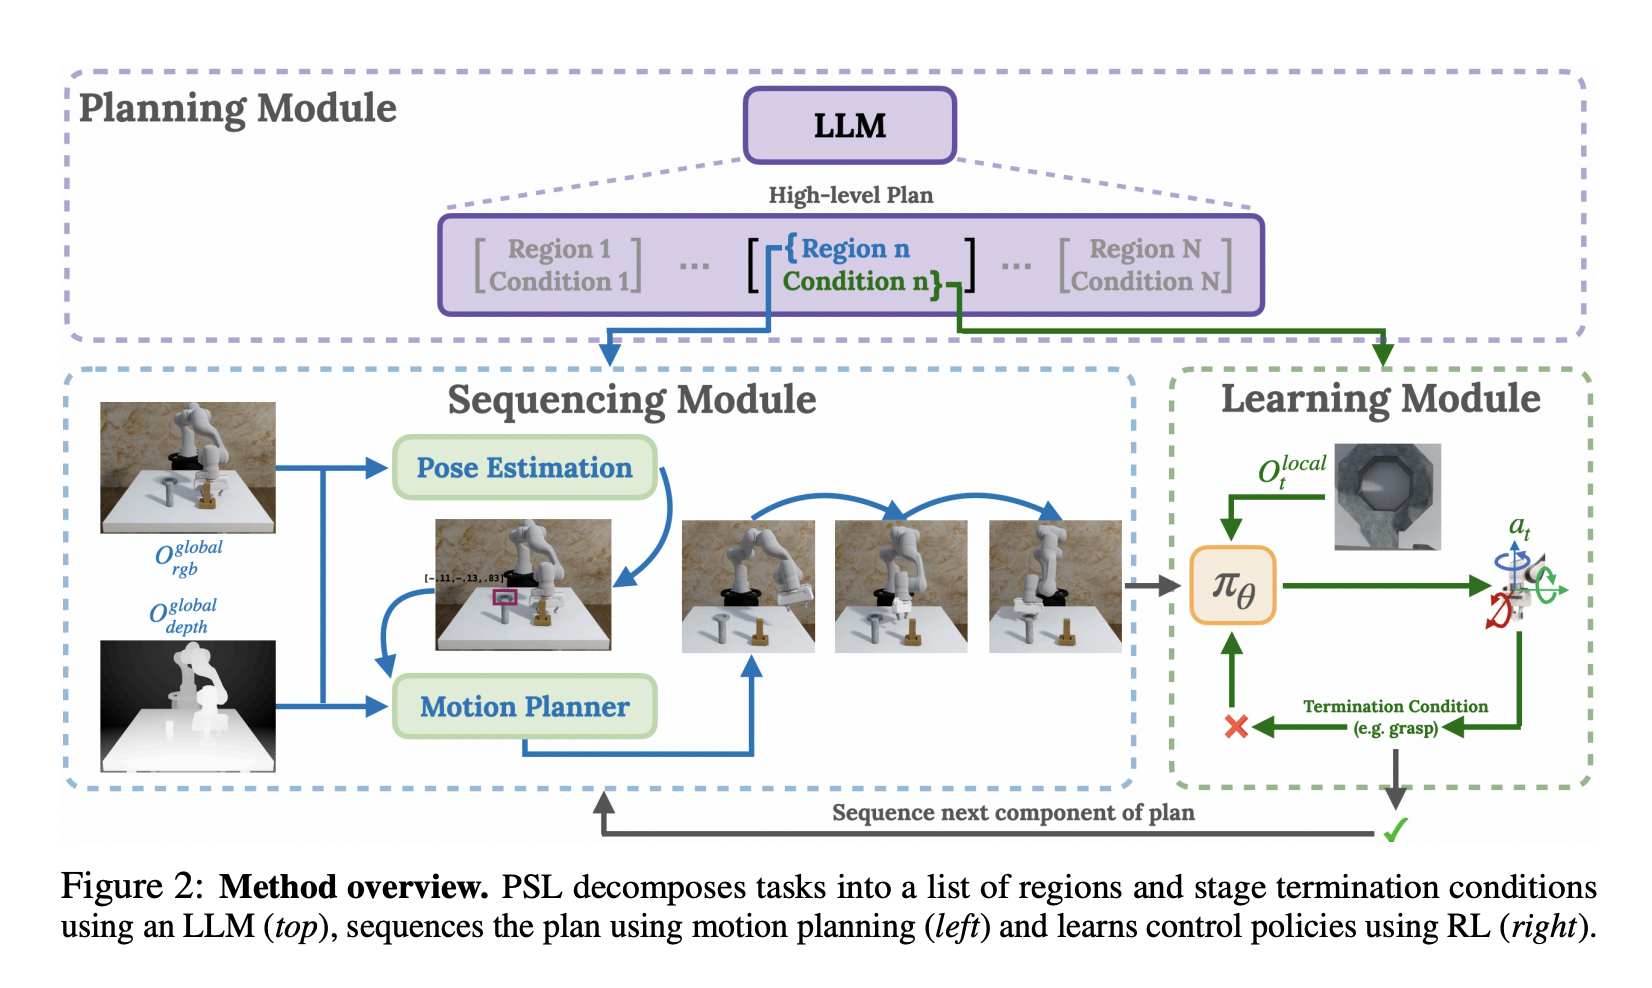  PLAN-SEQ-LEARN: A Machine Learning Method that Integrates the Long-Horizon Reasoning Capabilities of Language Models with the Dexterity of Learned Reinforcement Learning RL Policies